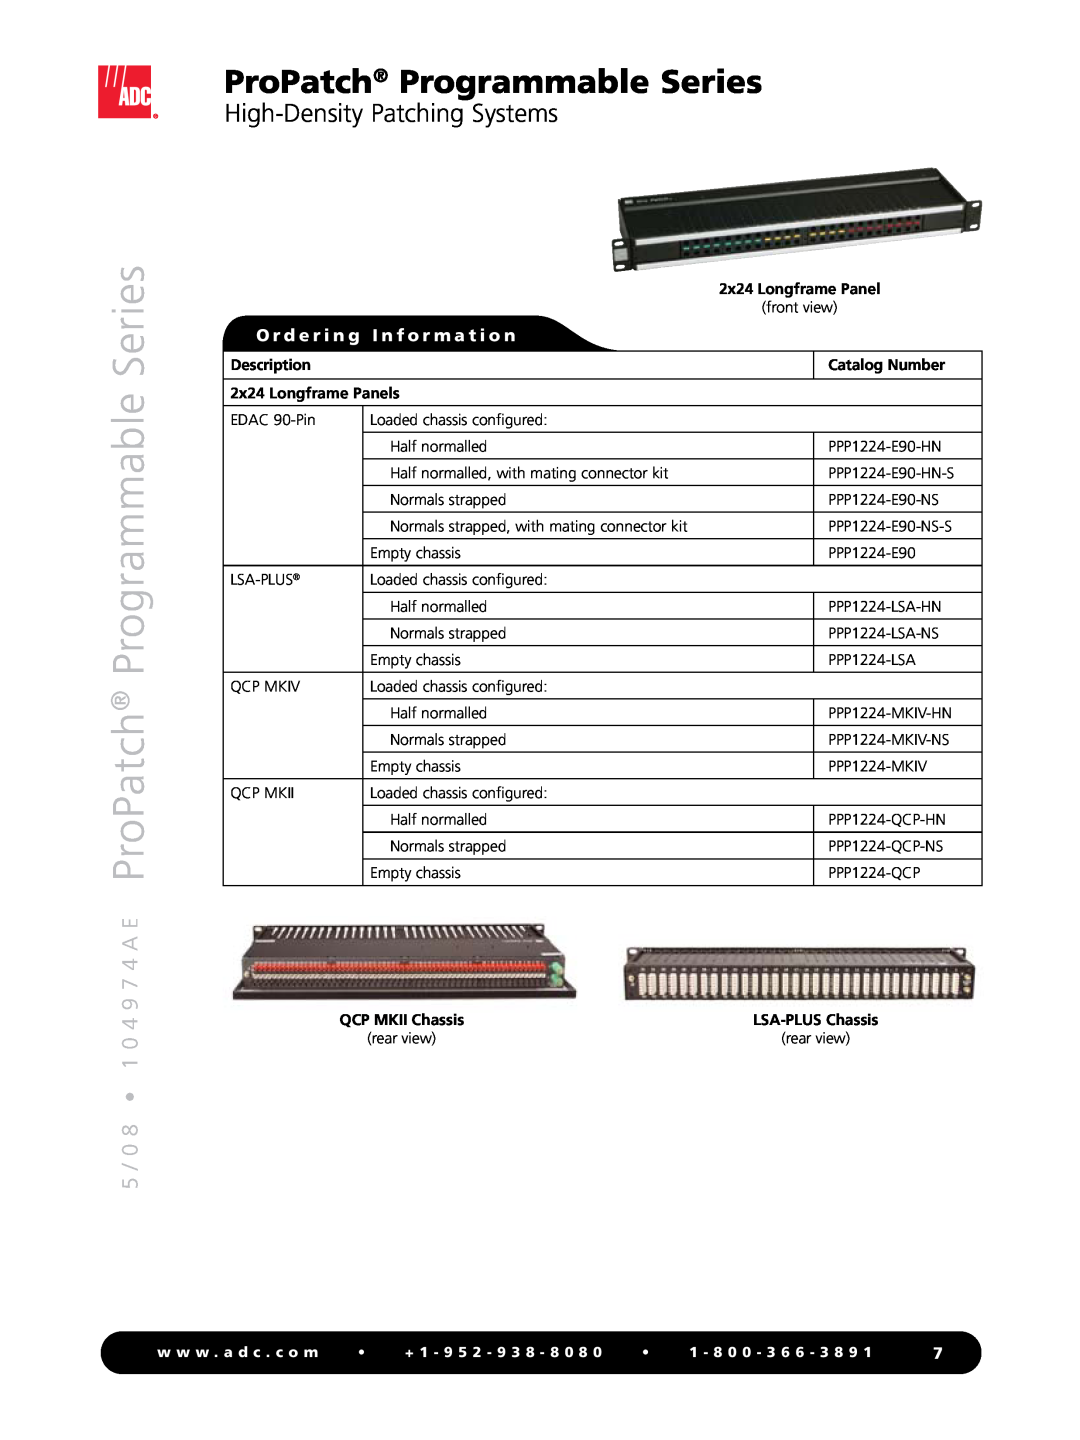 ADC manual 5 / 0 8 1 0 4 9 7 4 A E ProPatch Programmable Series, High-Density Patching Systems, w w w . a d c . c o m 